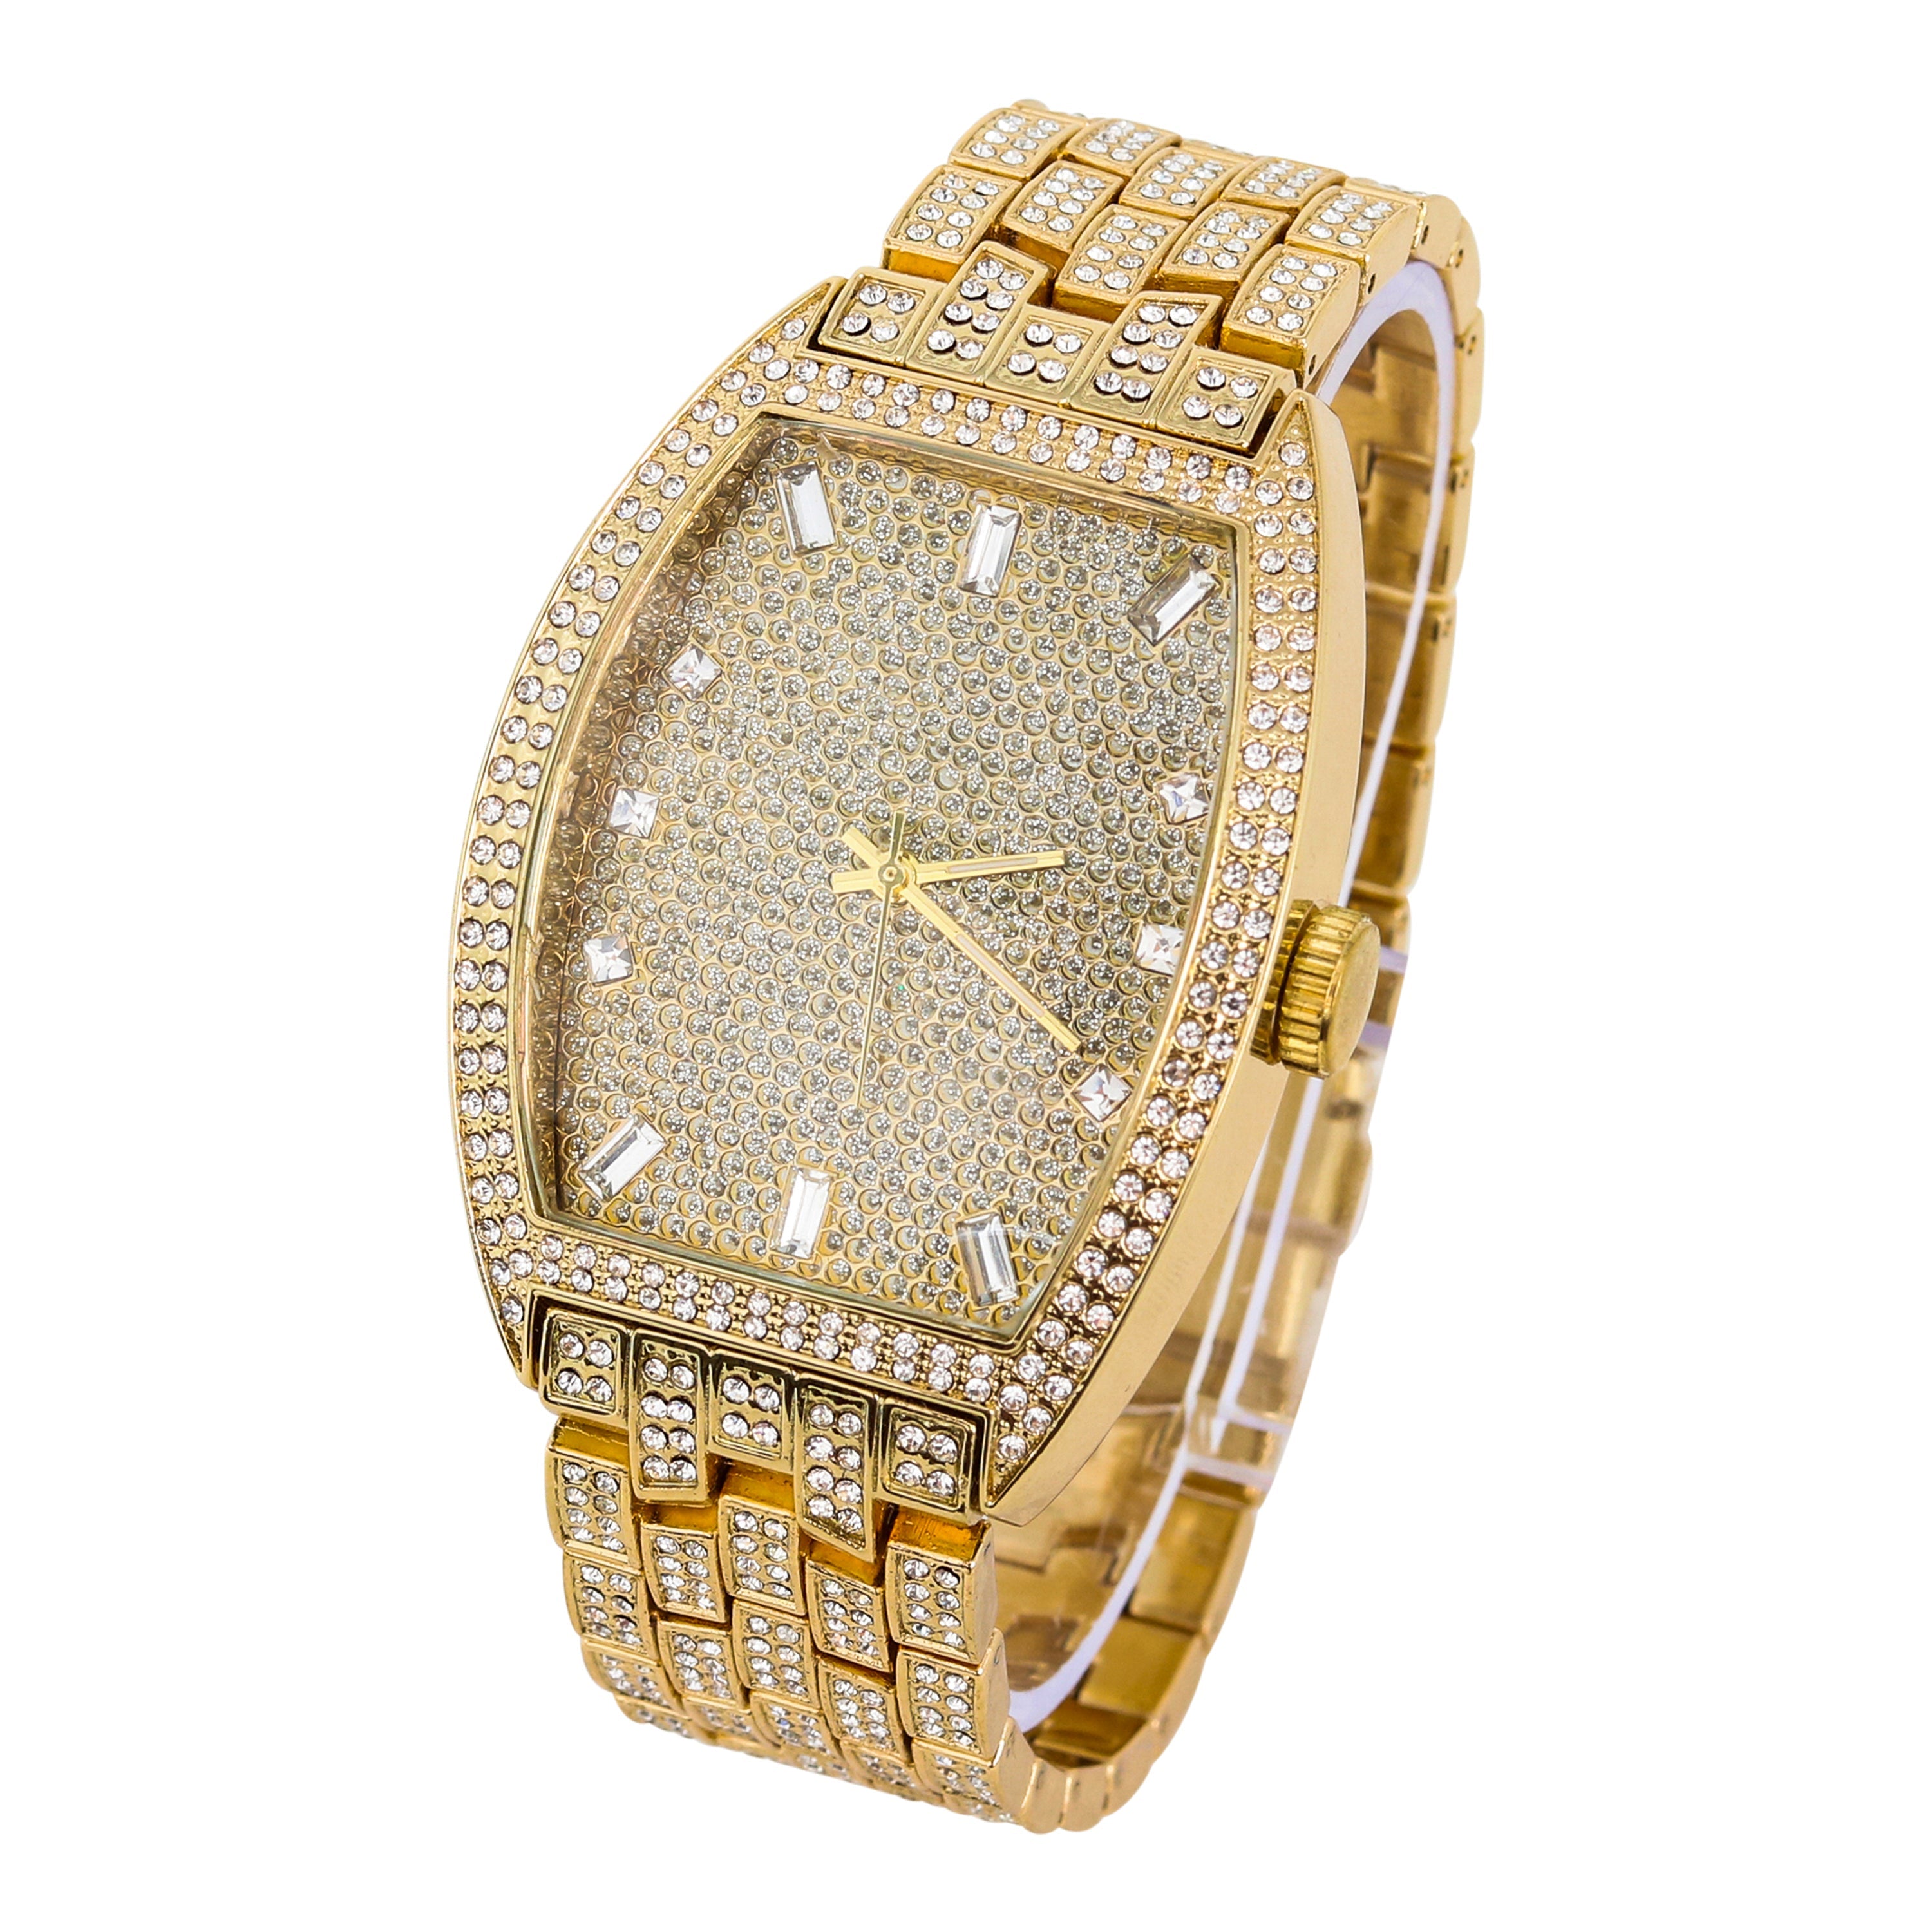 Men's Tonneau Dial Watch 40mm Gold - "Fully Iced Band"